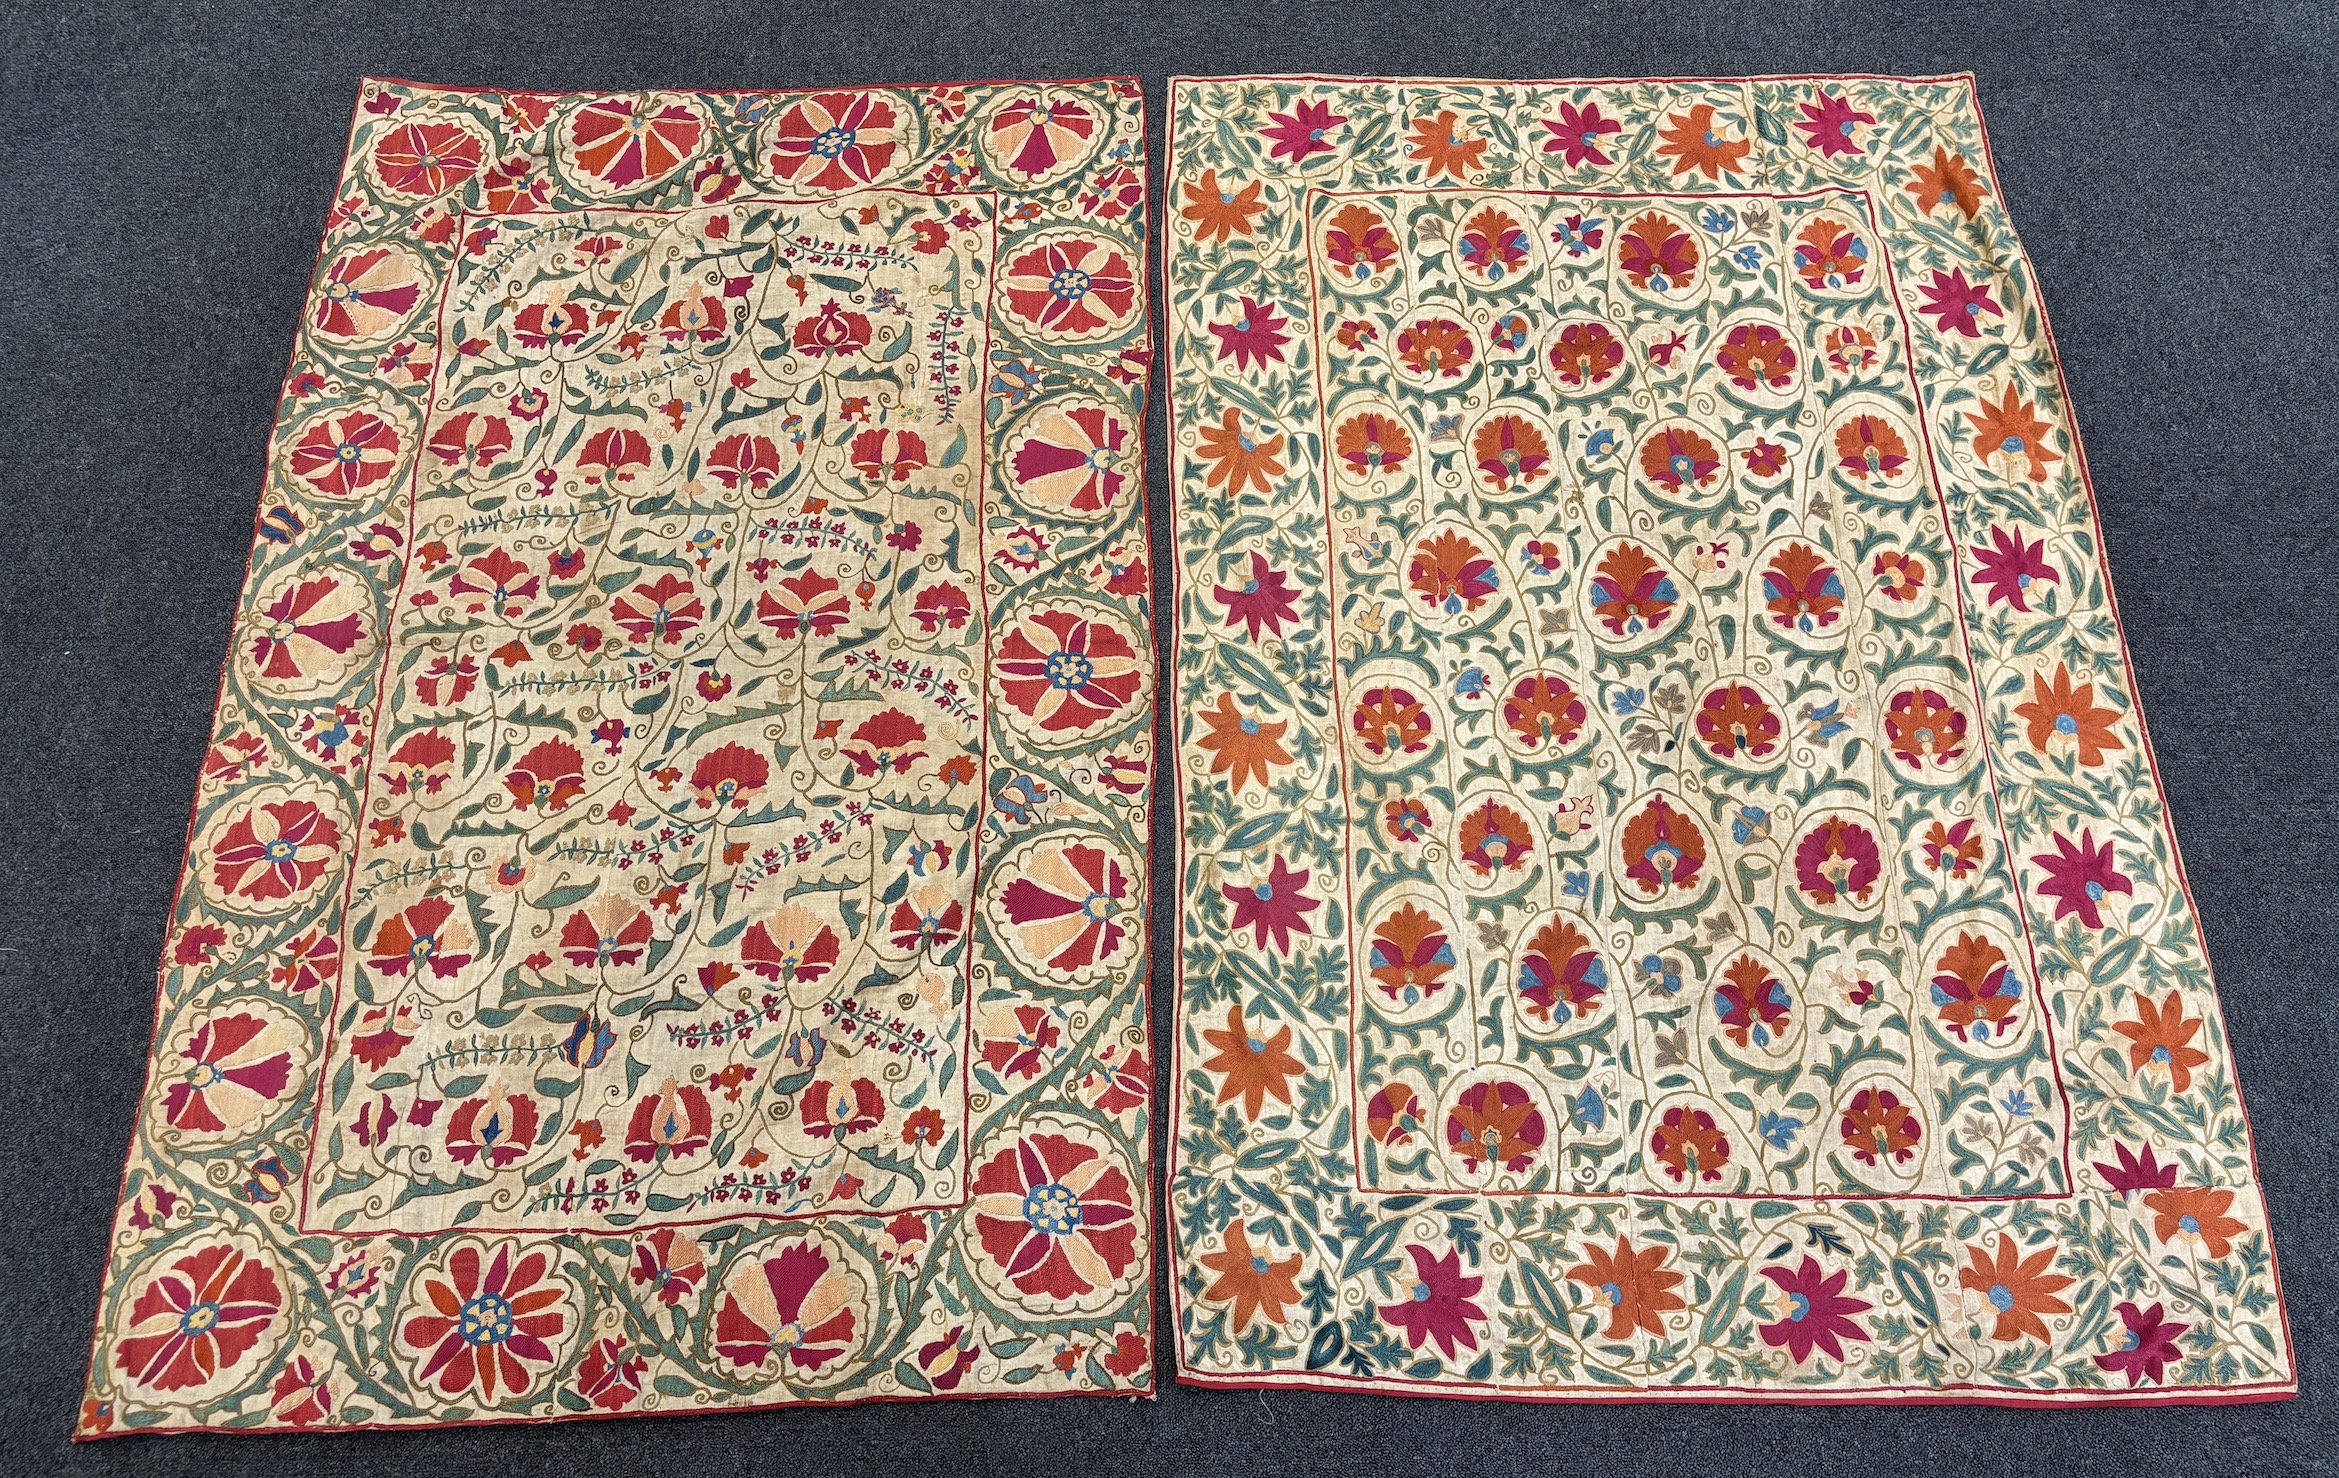 Two Uzbekistan Suzani, late 19th / early 20th century, embroidered hangings, on thick cotton, converted later to curtains, both richly embroidered with a wide floral frieze and a central all over floral design using Bukh